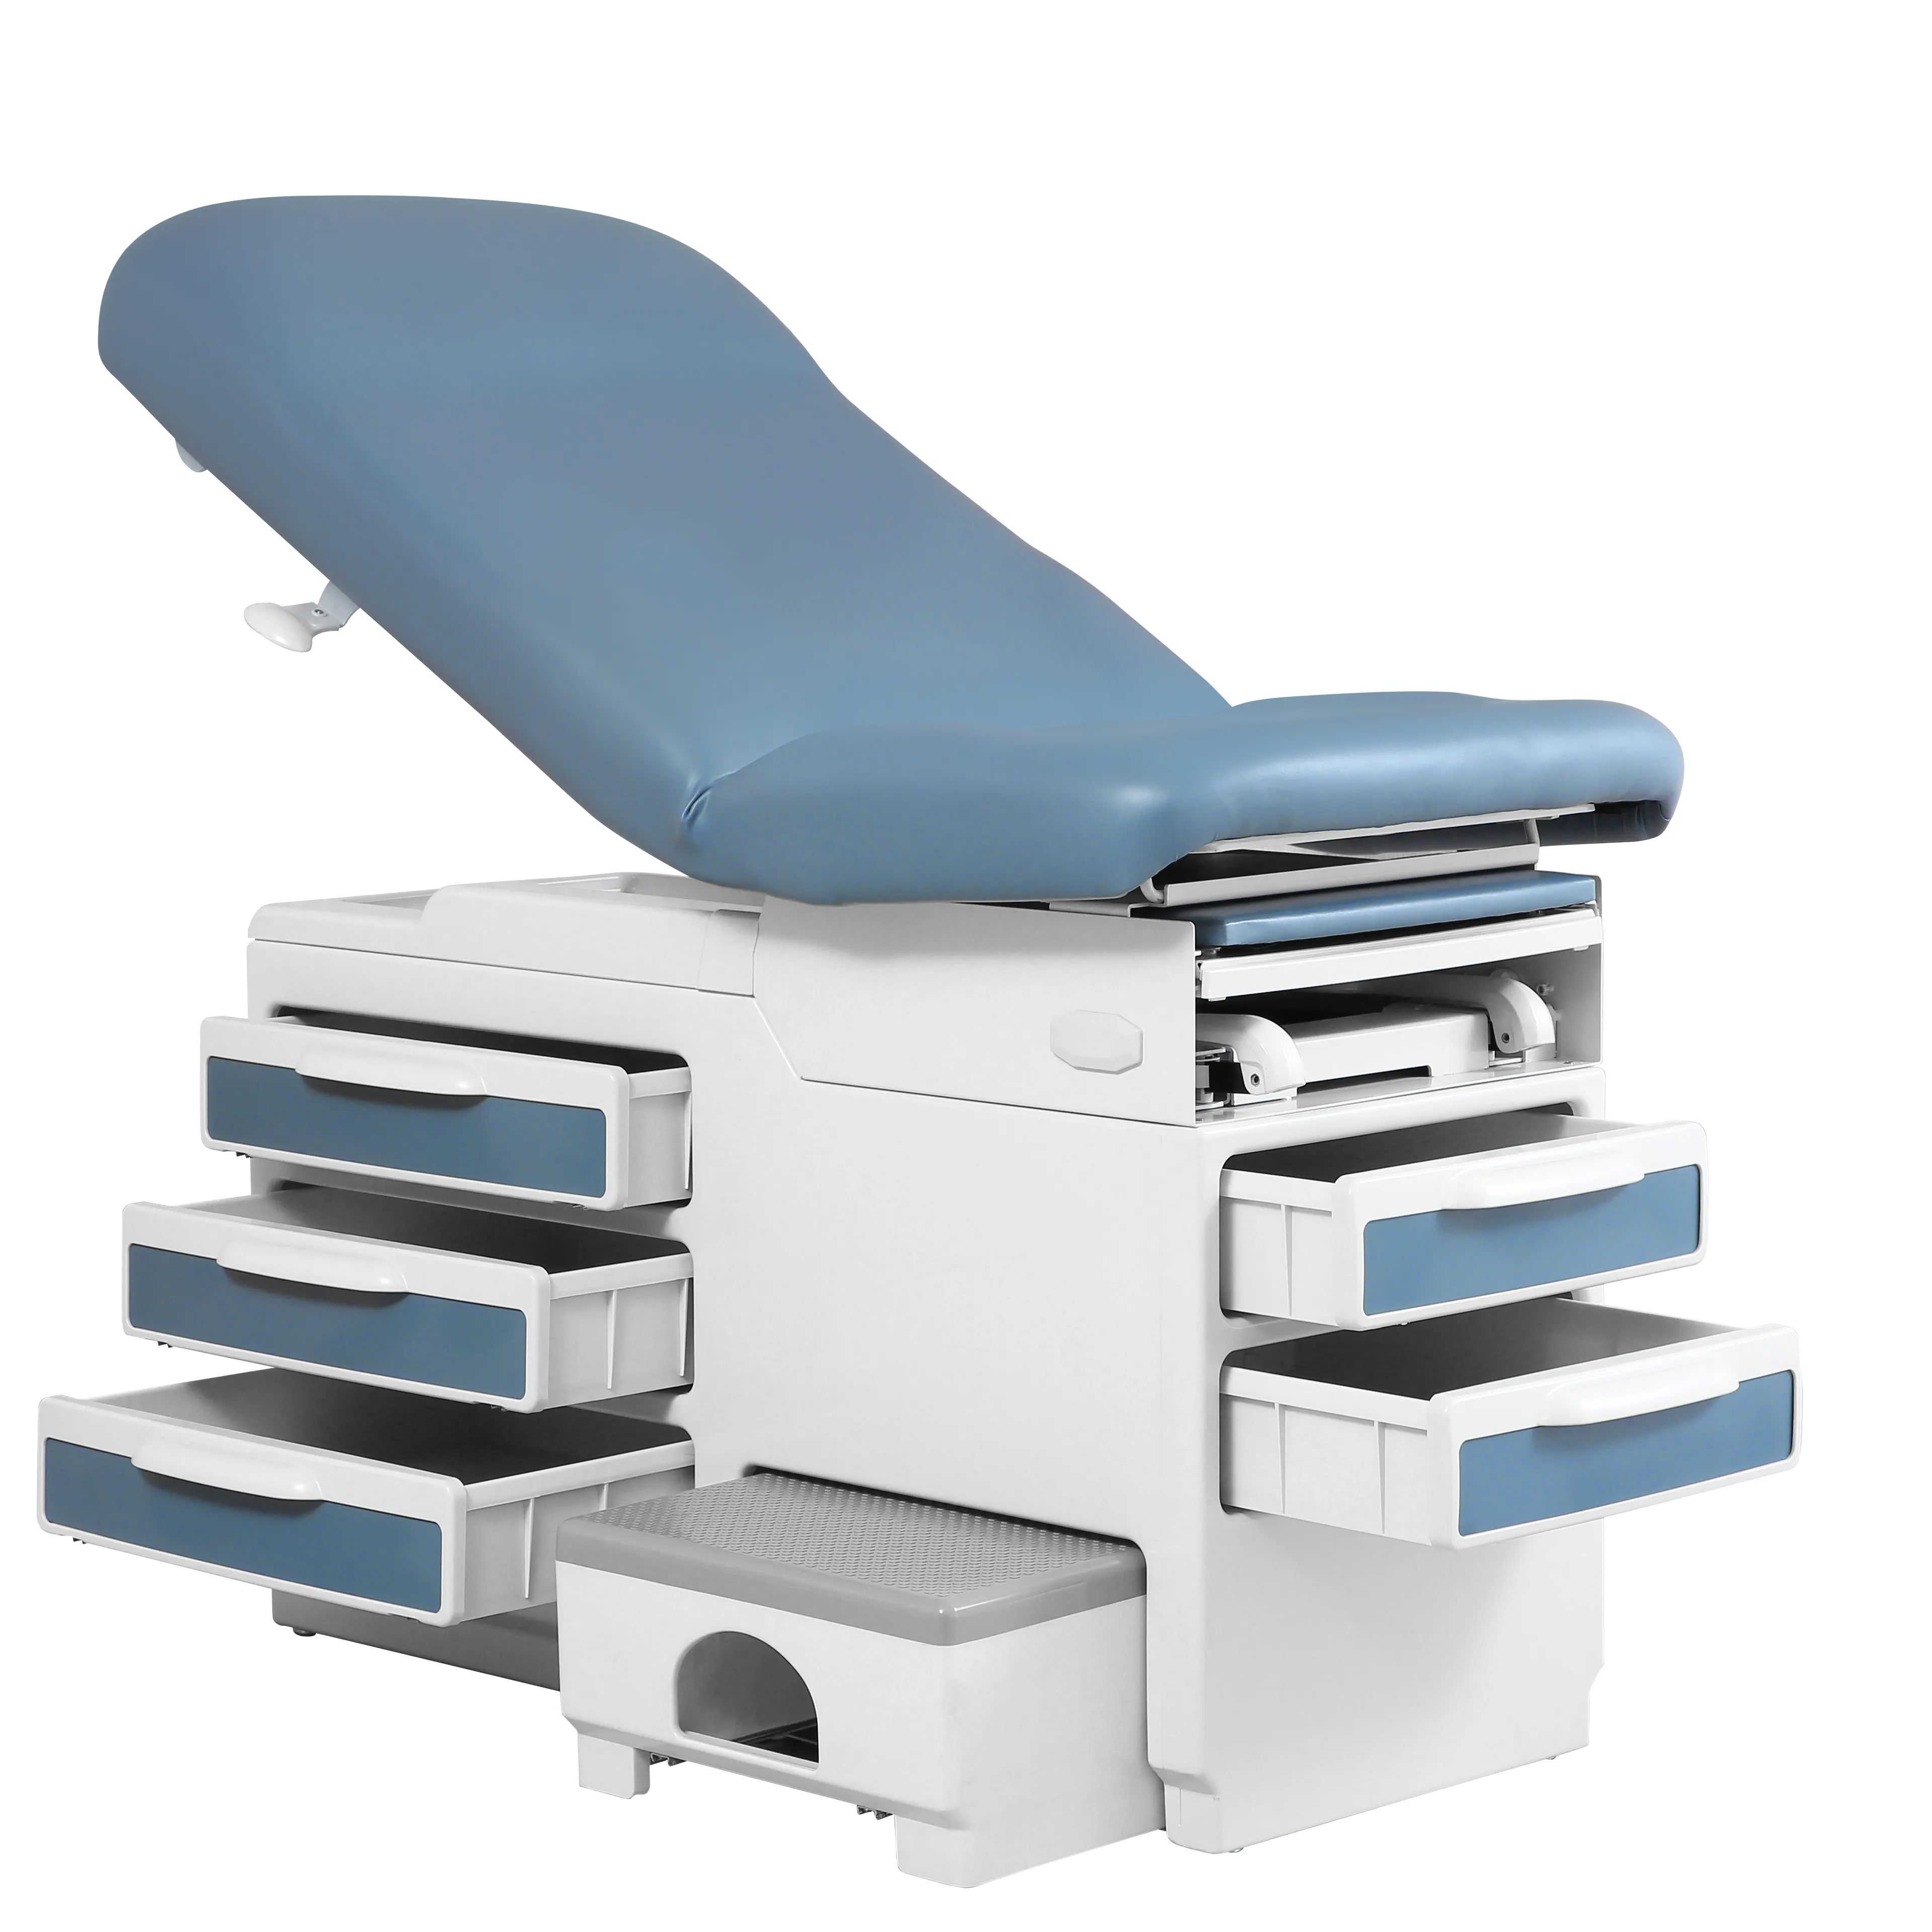 Luxury multifunction medical examination table hospital gynecology exam chair bed with drawer